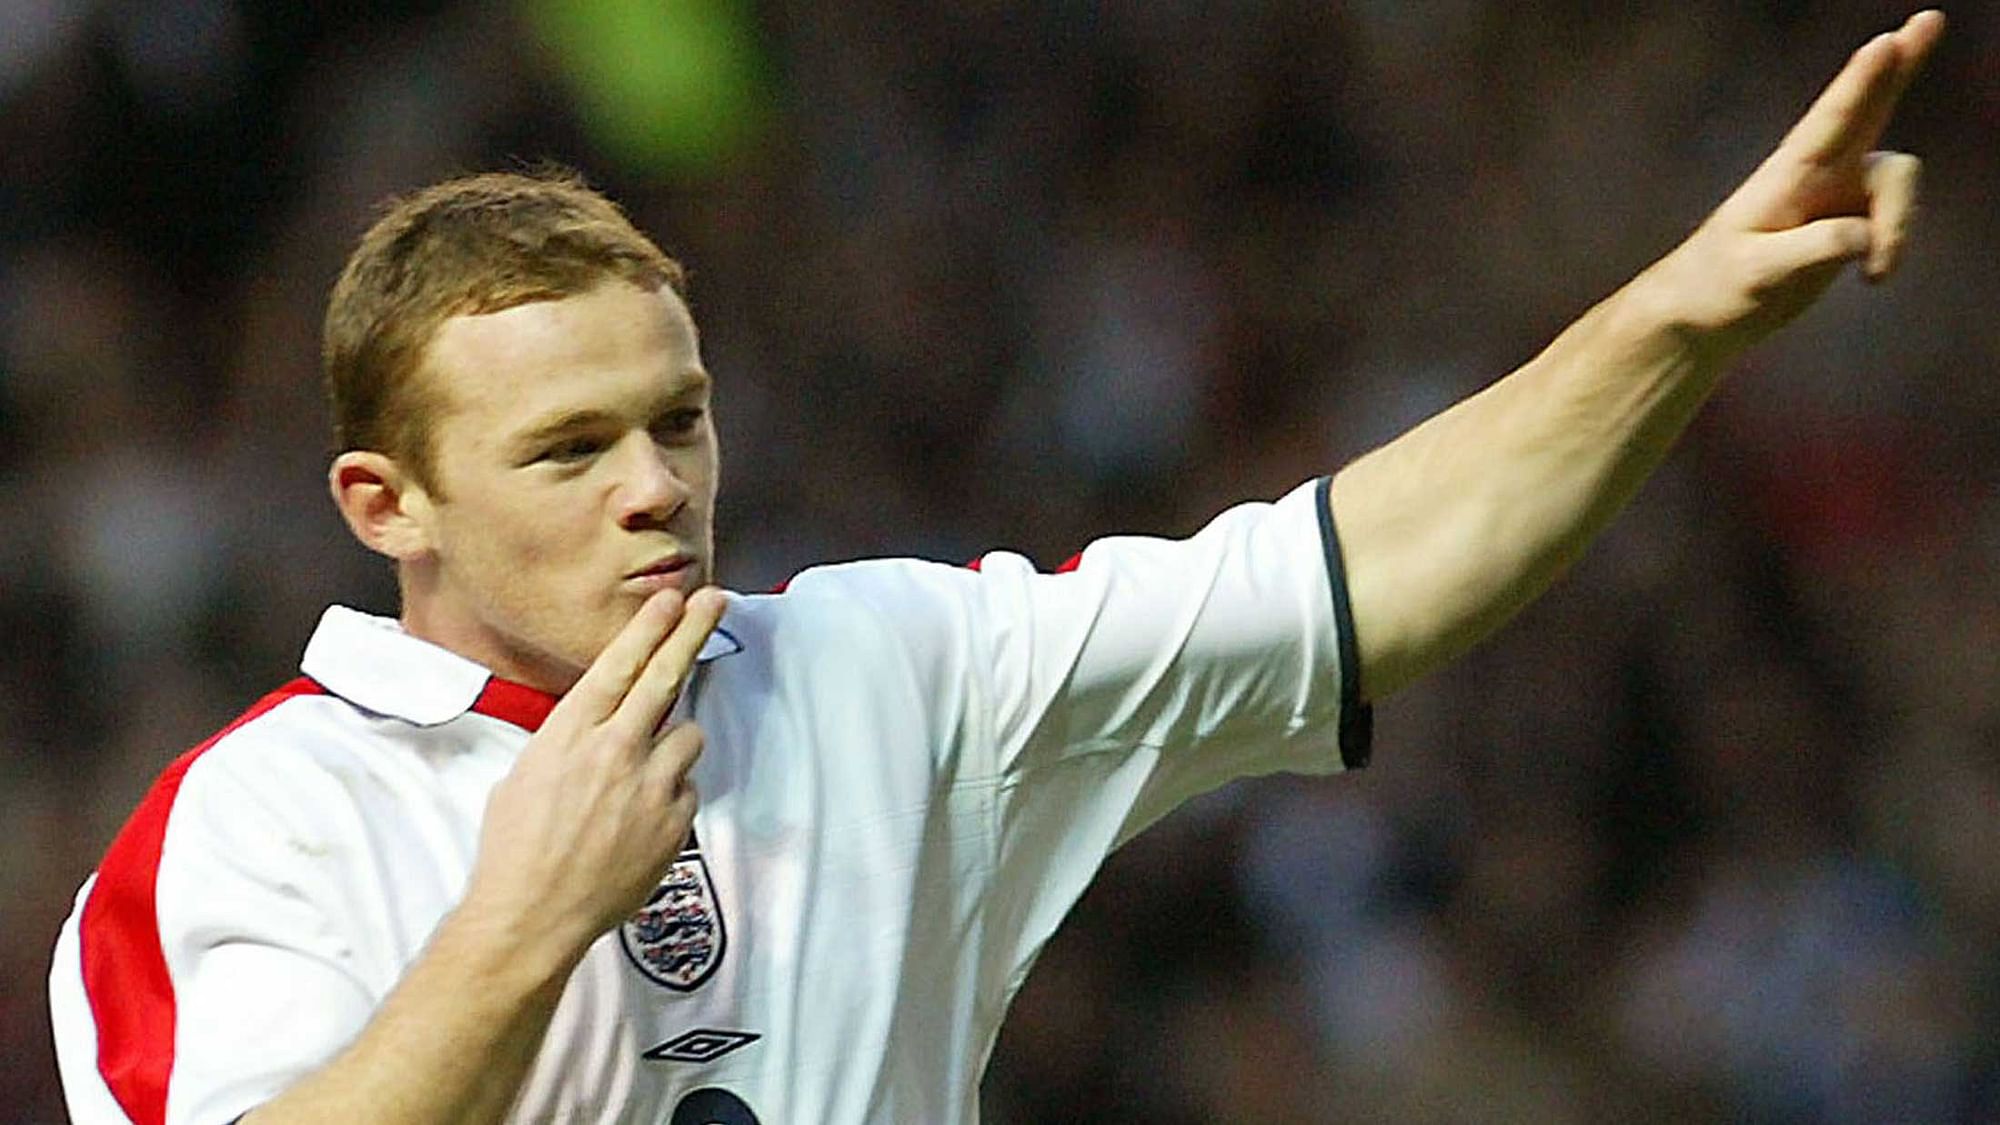 16 November, 2013 | File photo of a young Wayne Rooney celebrating his goal against Denmark in an international friendly match at Old Trafford, Manchester